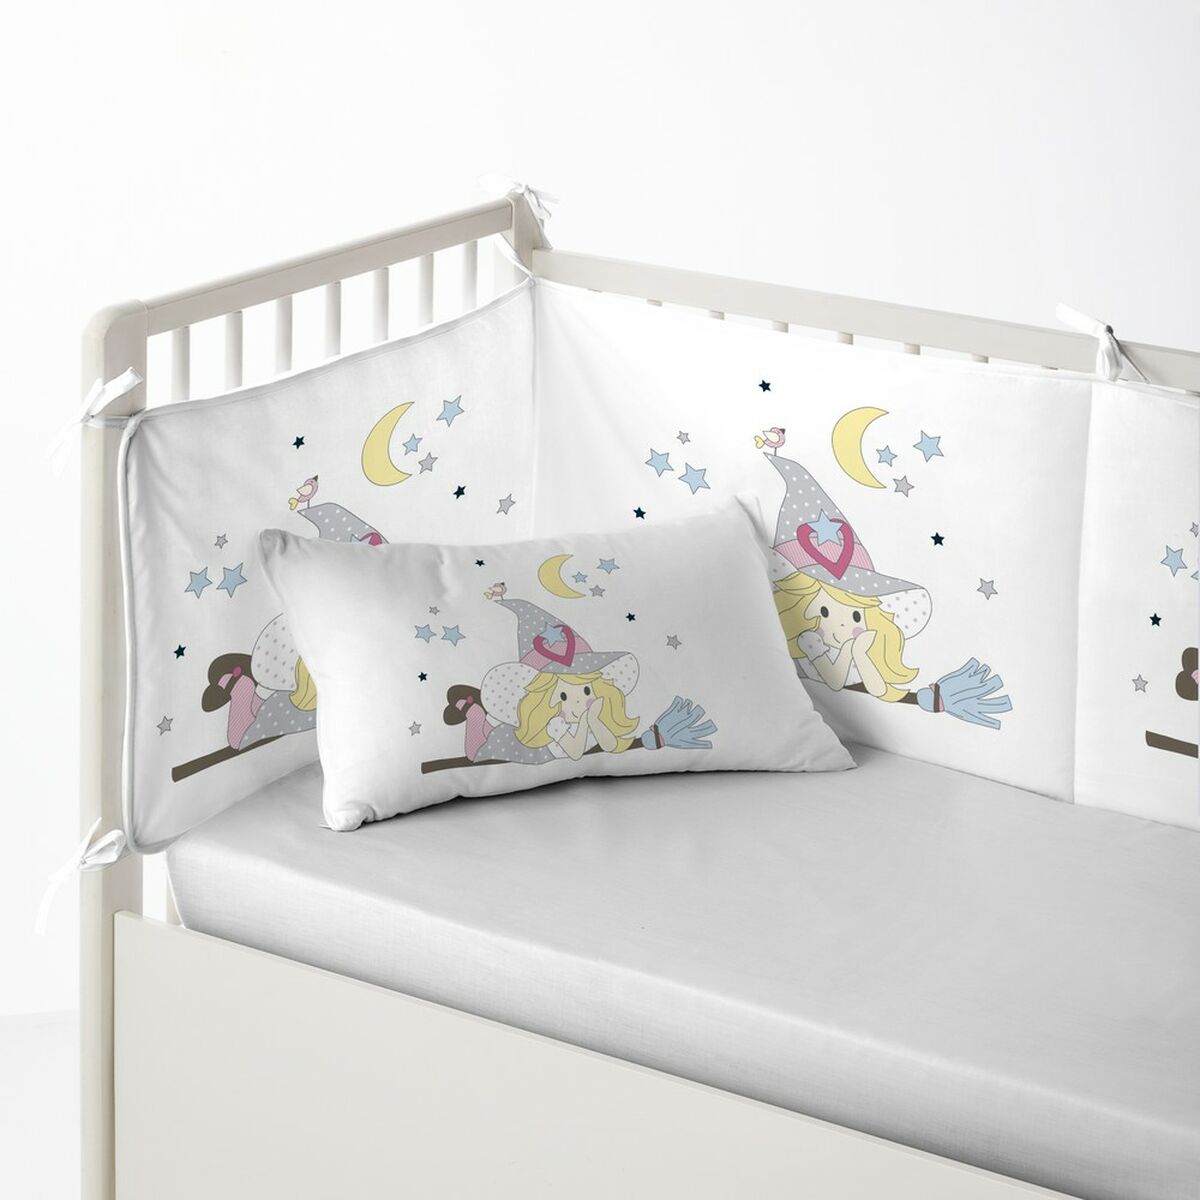 Cot protector Cool Kids Witch (60 x 60 x 60 + 40 cm)